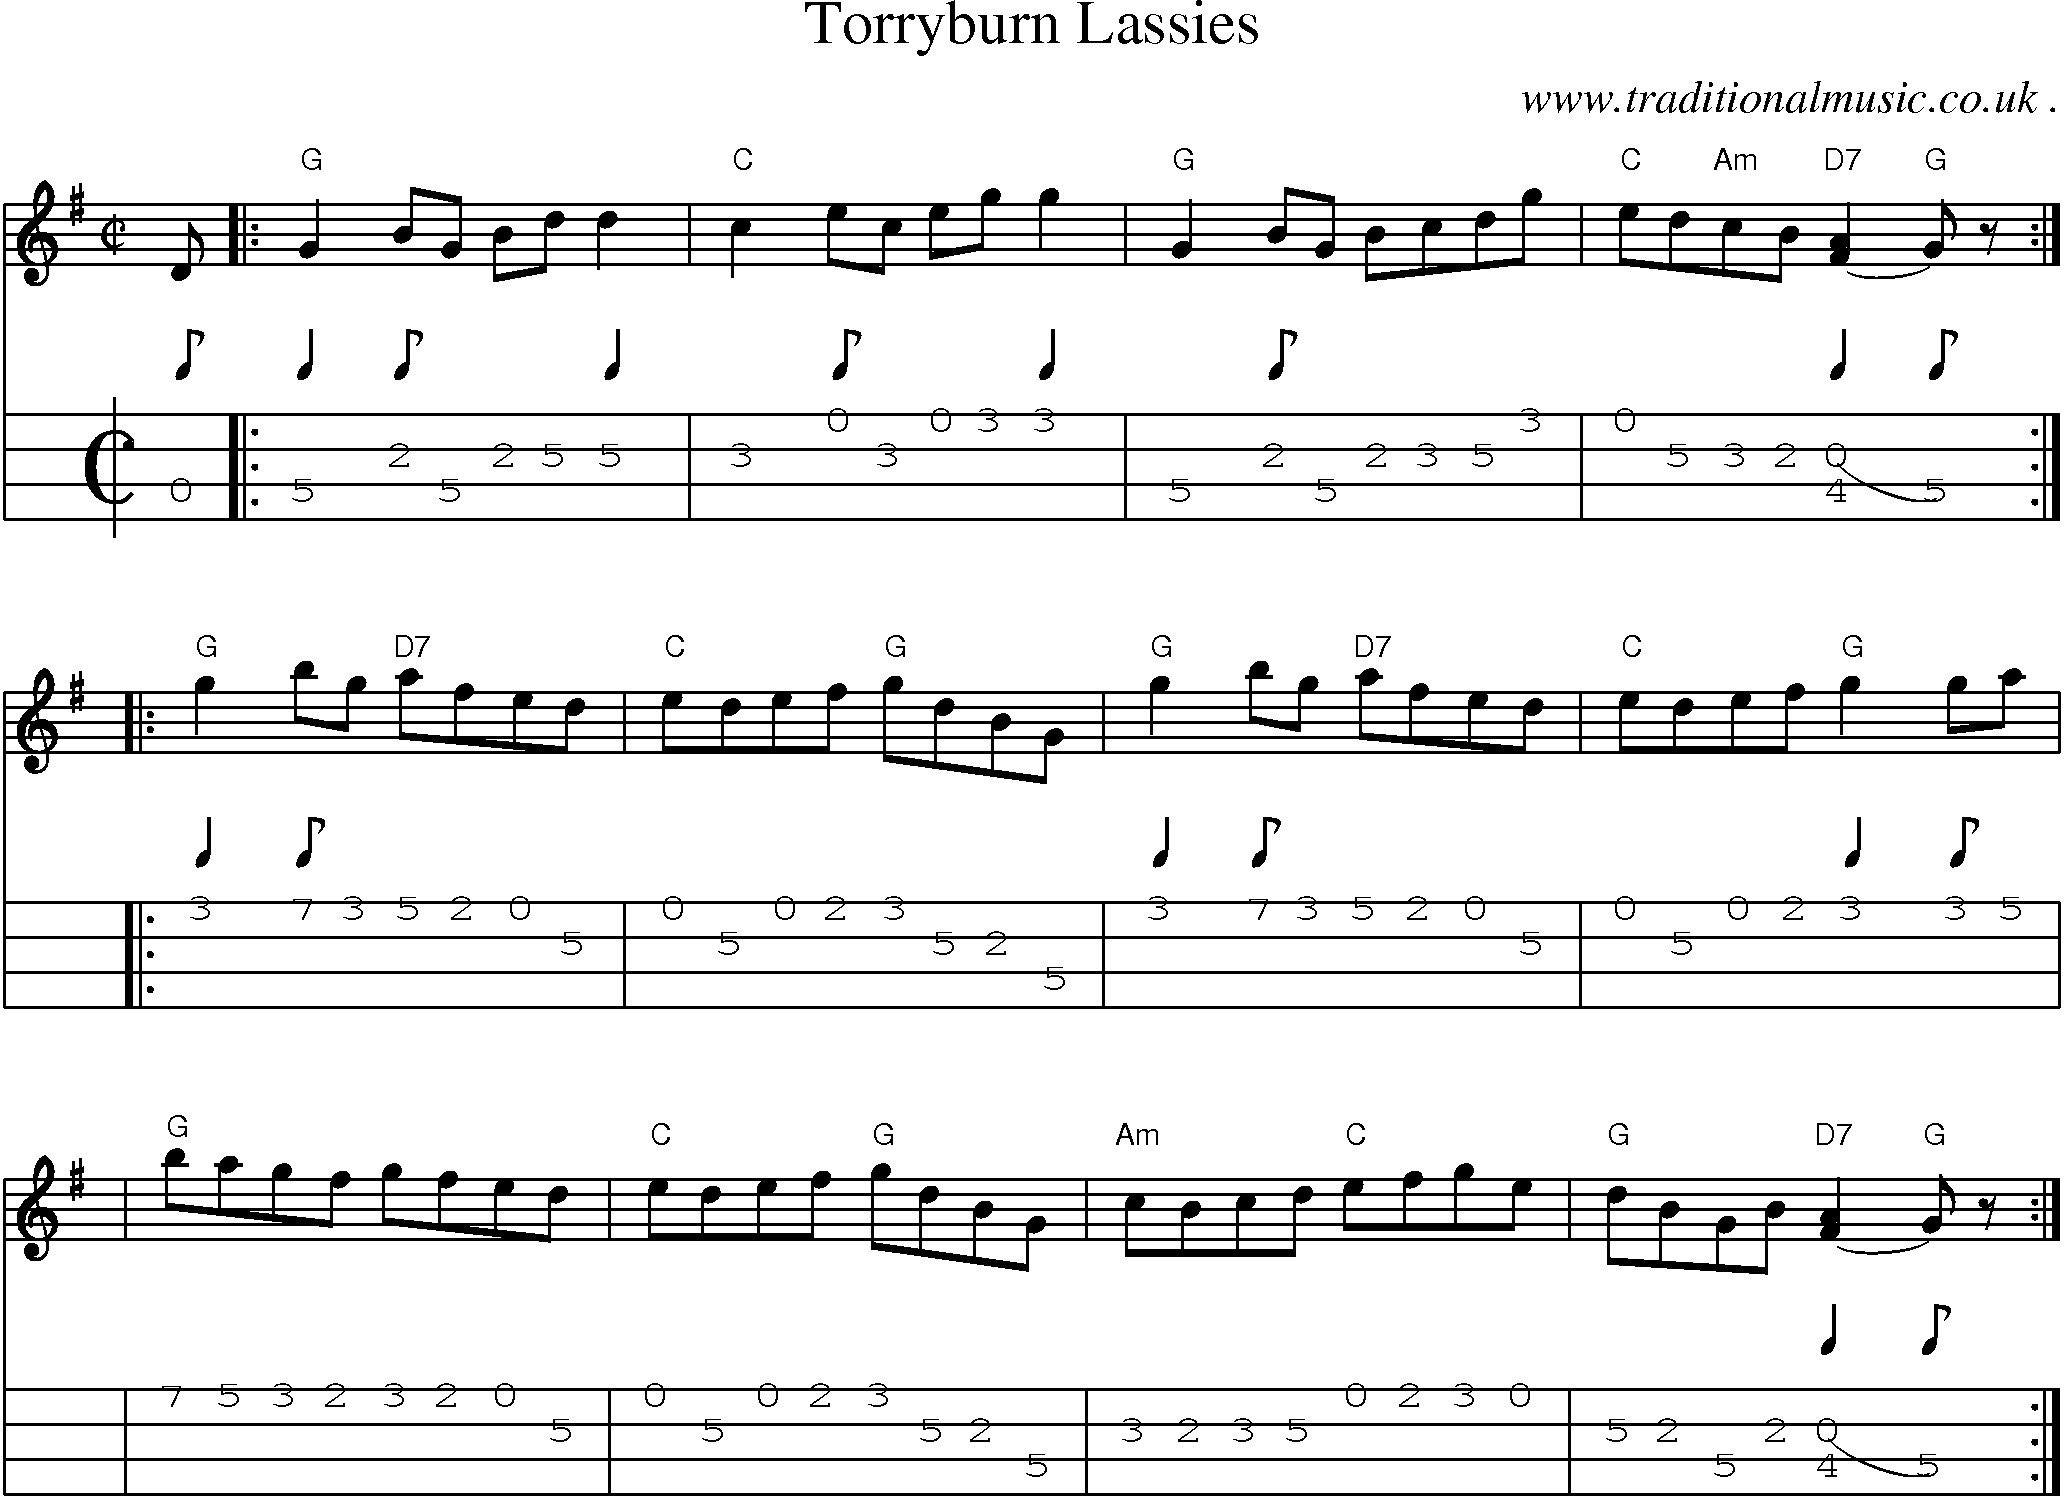 Sheet-music  score, Chords and Mandolin Tabs for Torryburn Lassies